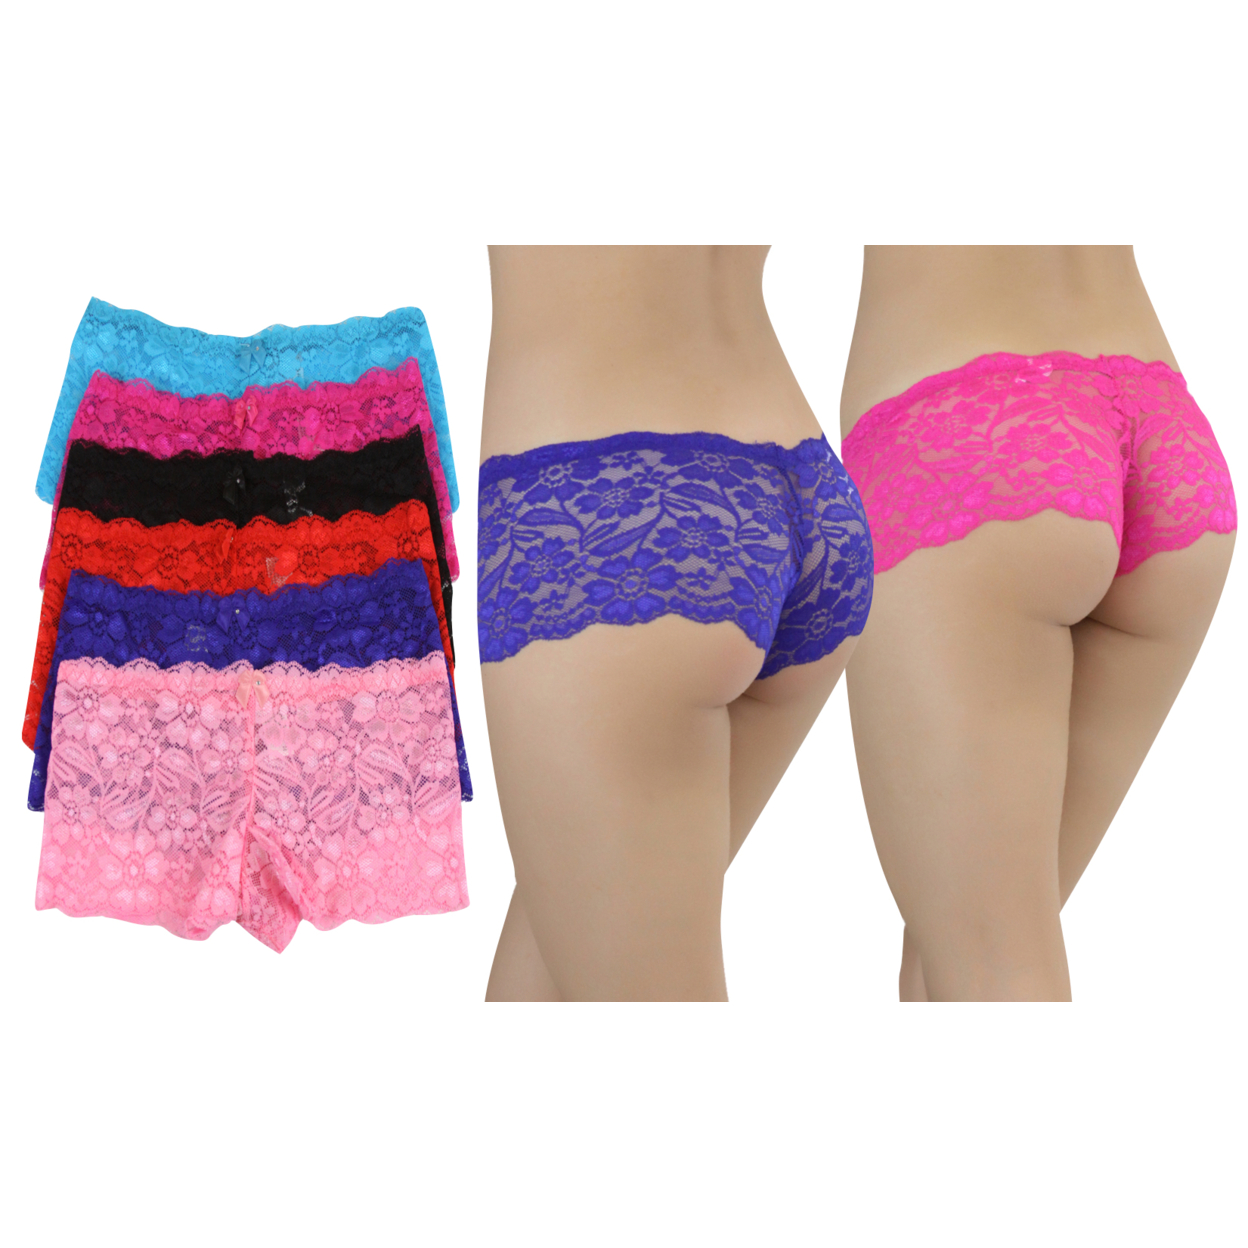 6 Pack Of Women's Sheer Floral Lace Boyshorts - Small